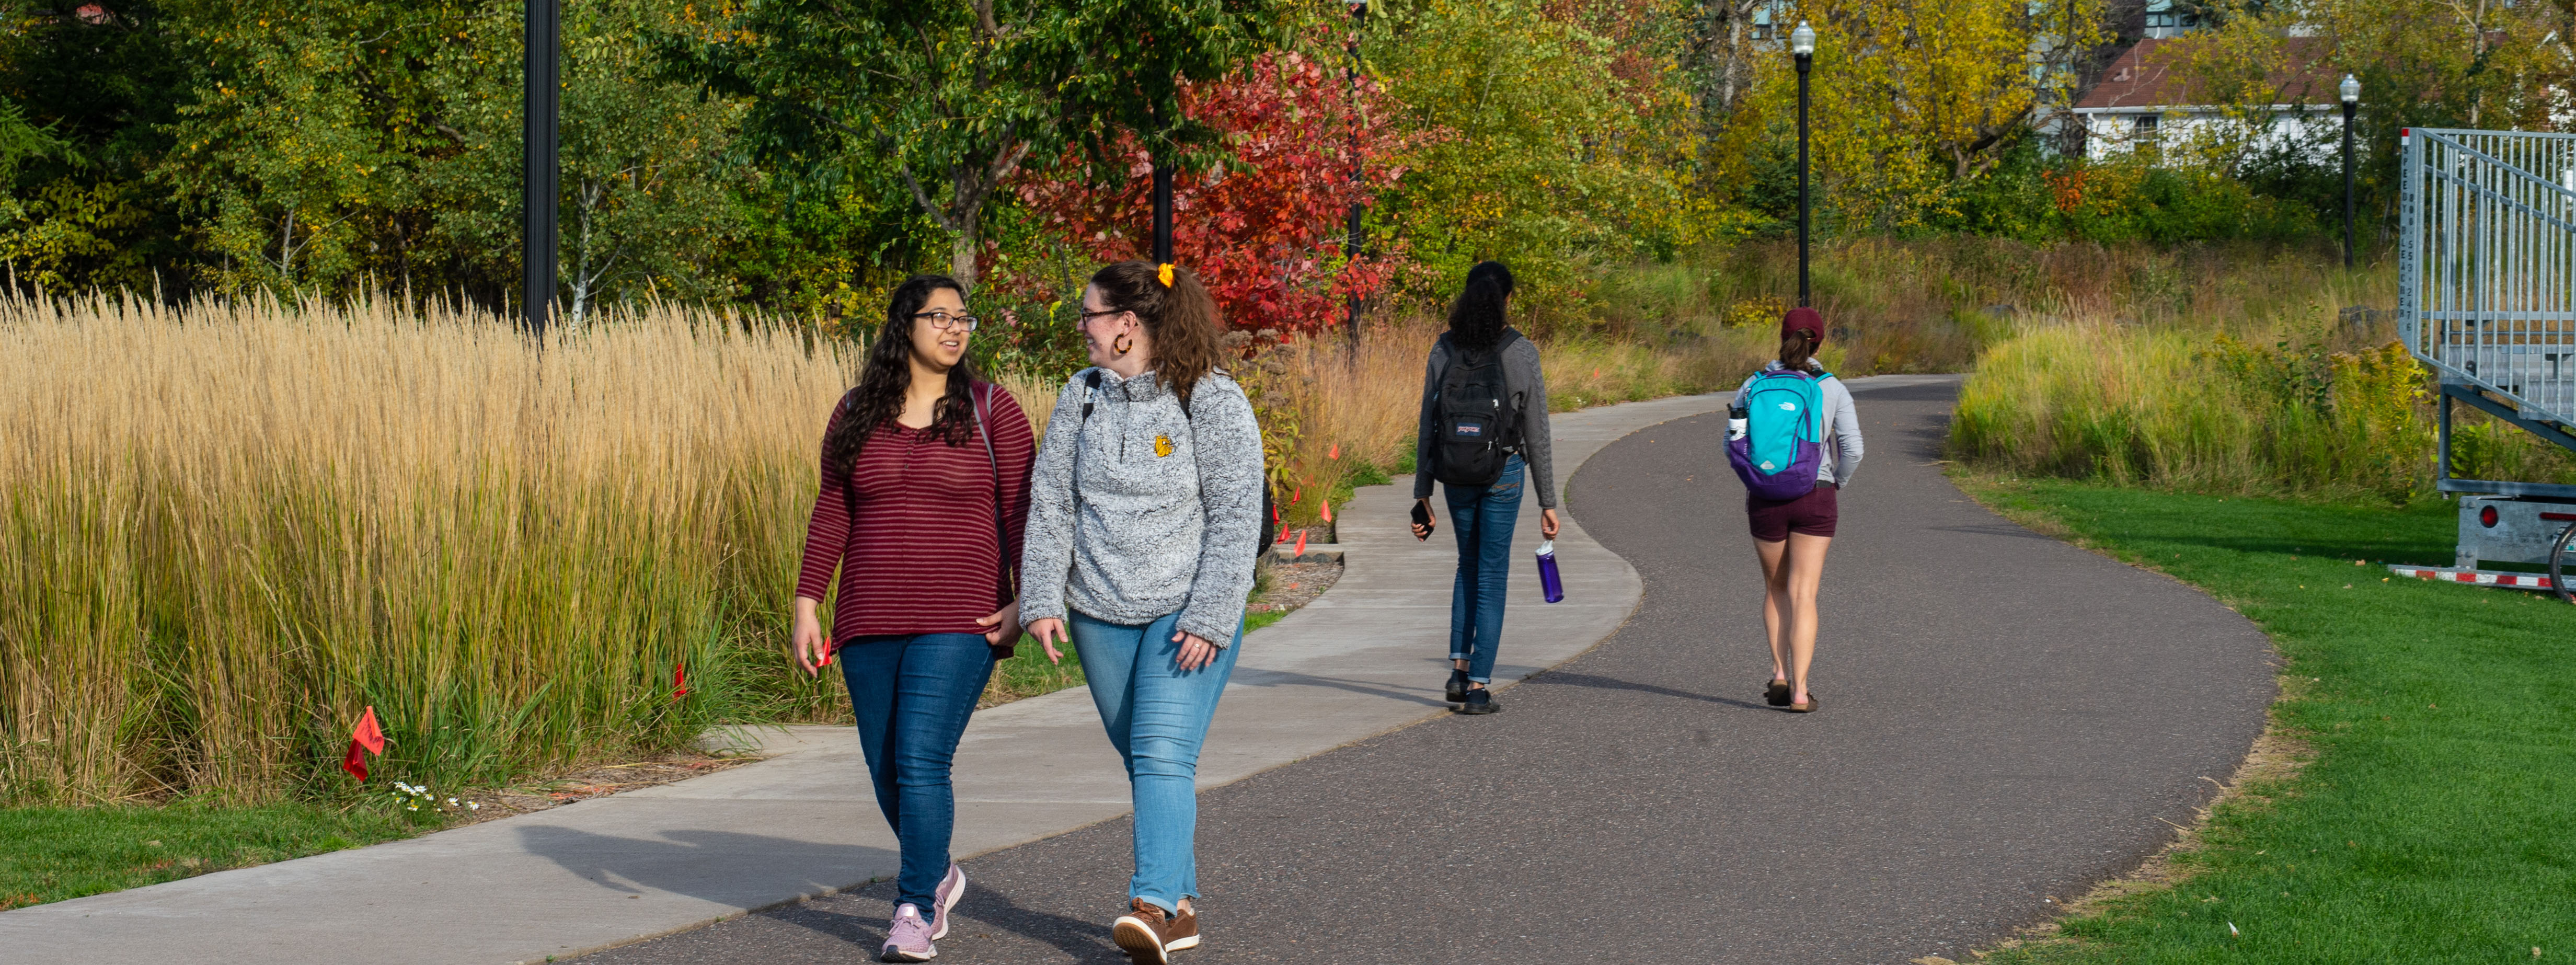 Two students walk towards the camera and two students walk away from the camera on an asphalt path with green grass and tall grass on either side on the UMD campus.